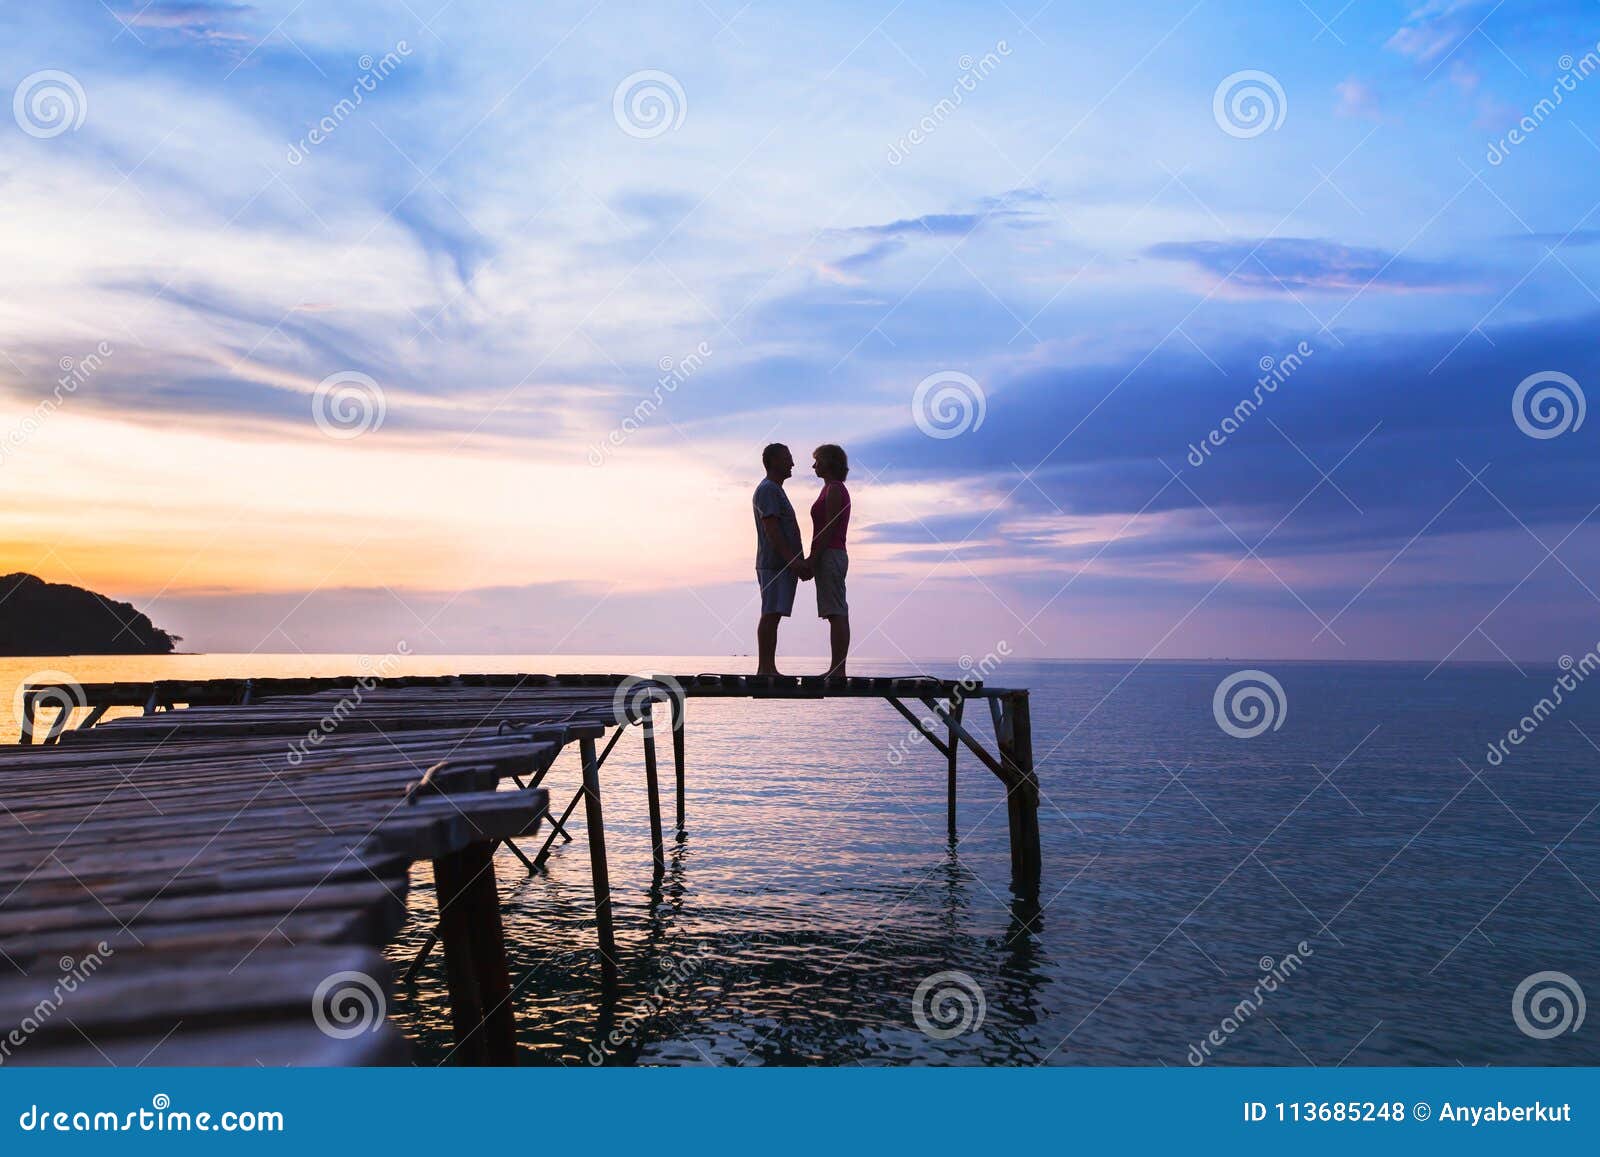 love, silhouette of affectionate couple on the pier at sunset beach